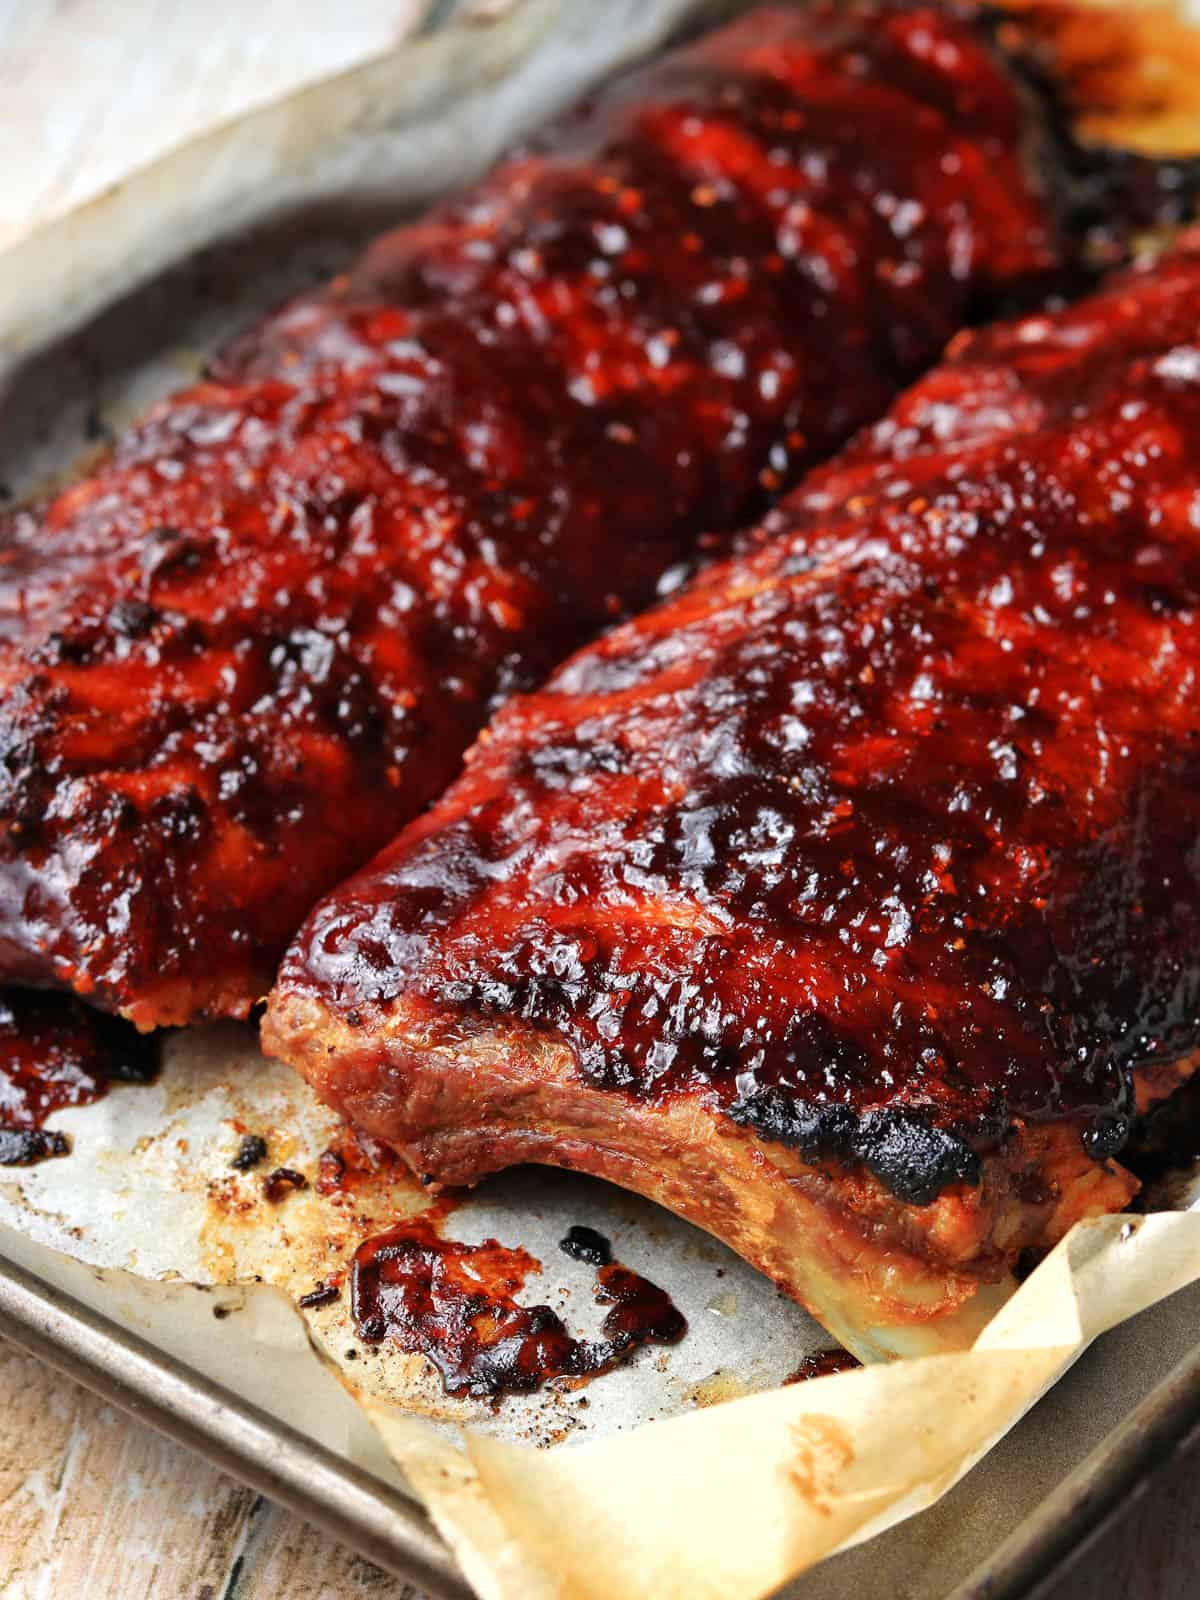 Baked barbecue ribs on a baking tray, fresh from the oven.